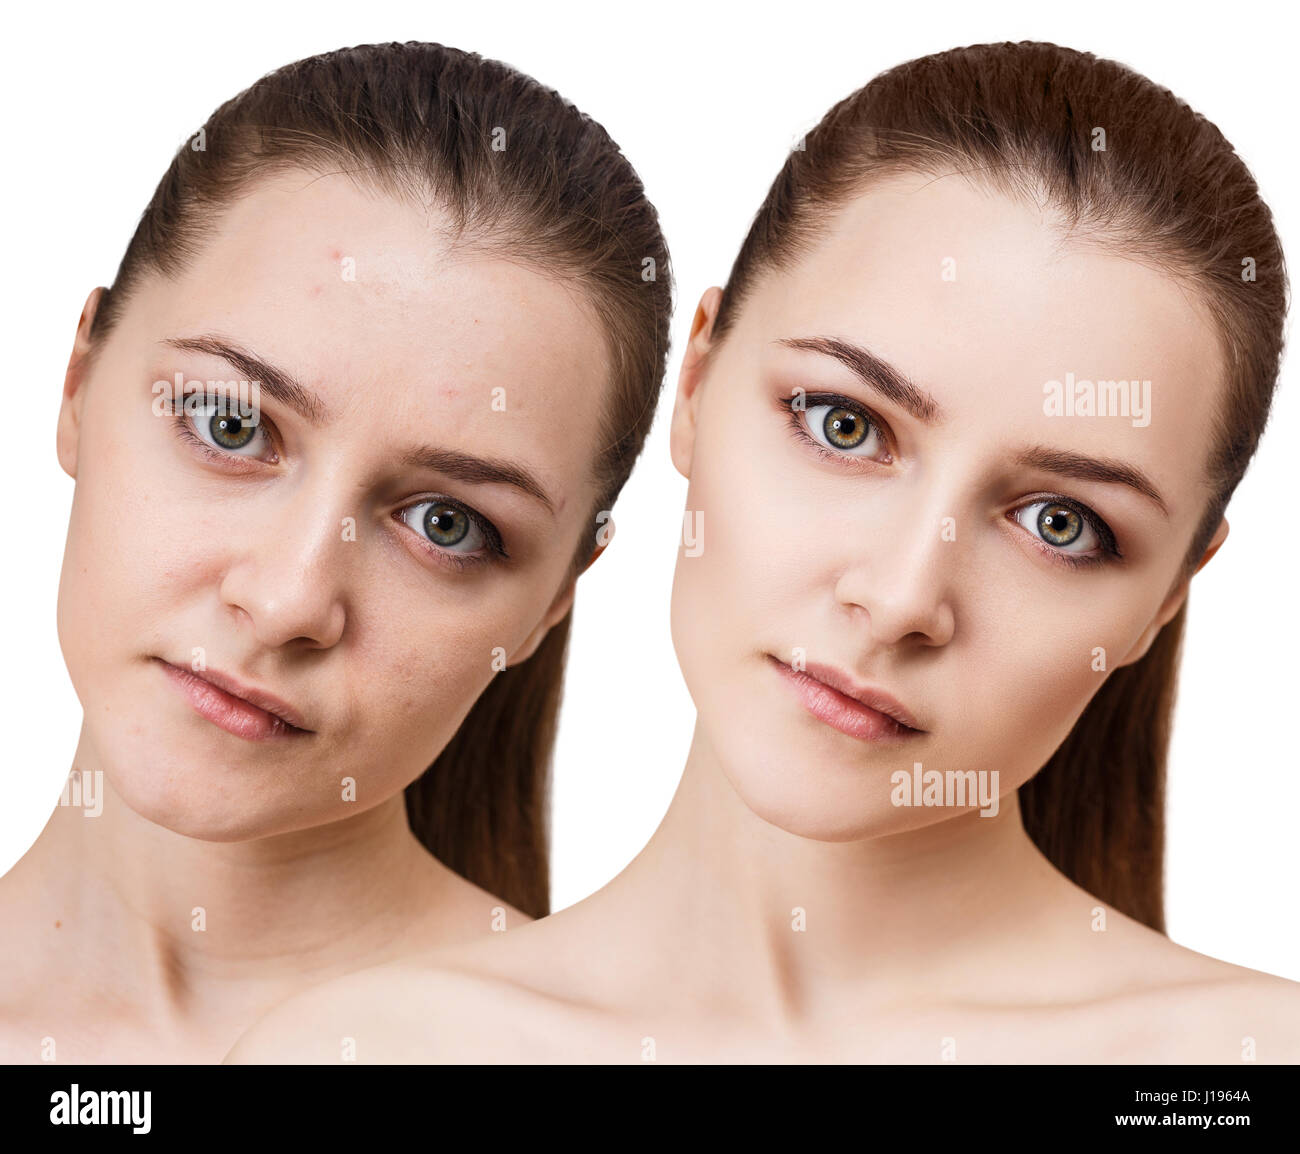 Young woman before and after retouch. Stock Photo